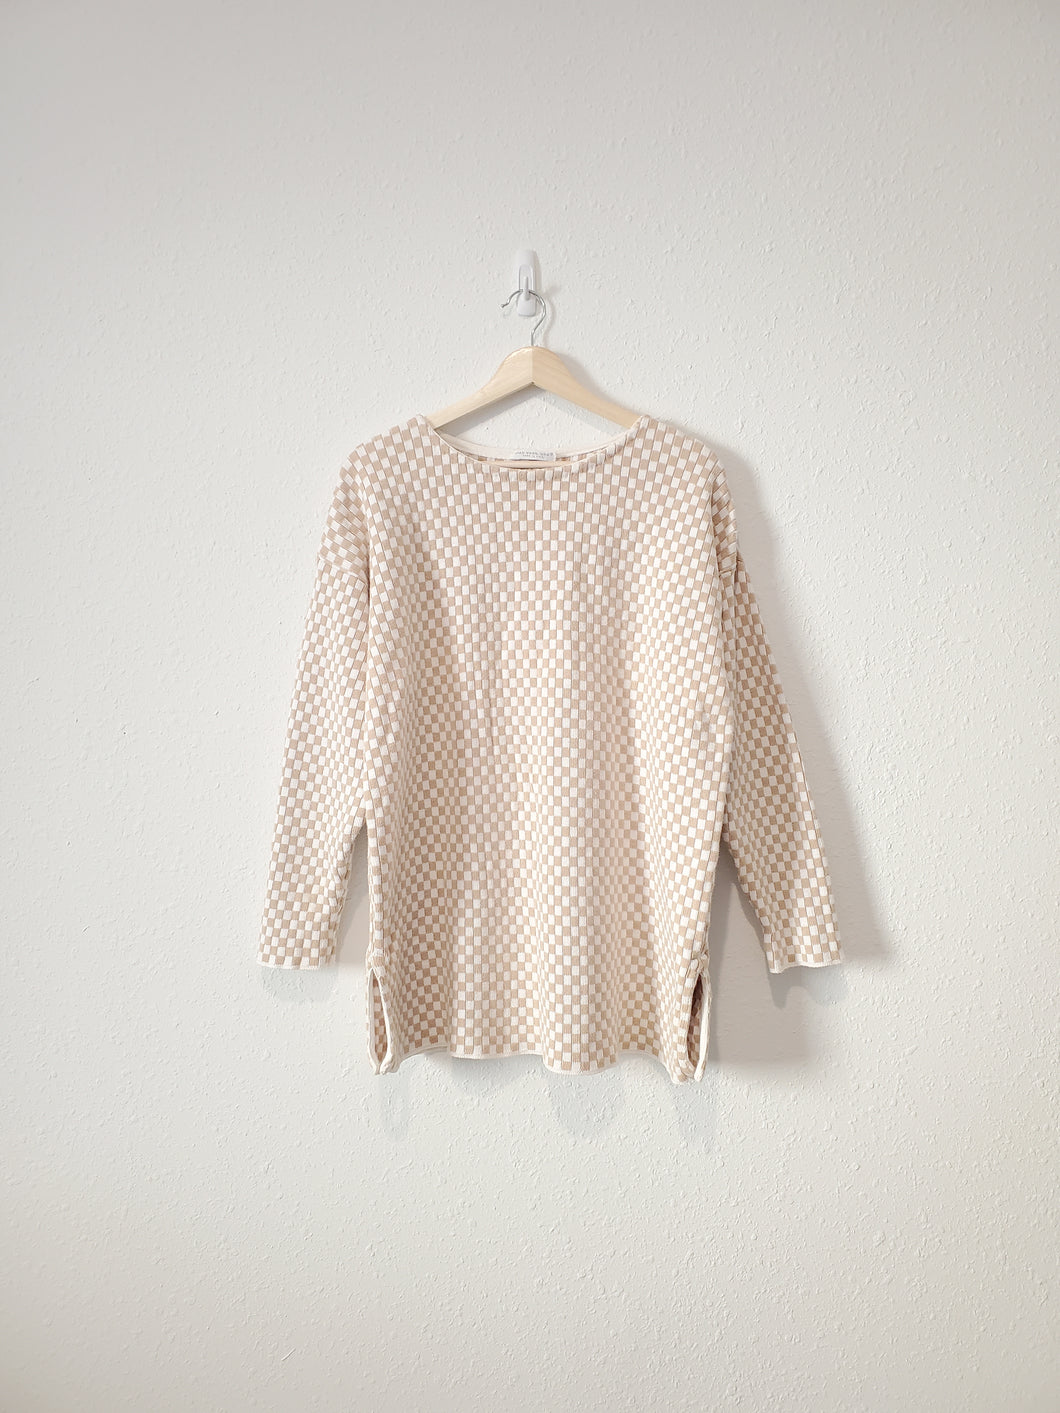 Vintage Neutral Gingham Sweater (S-XL)